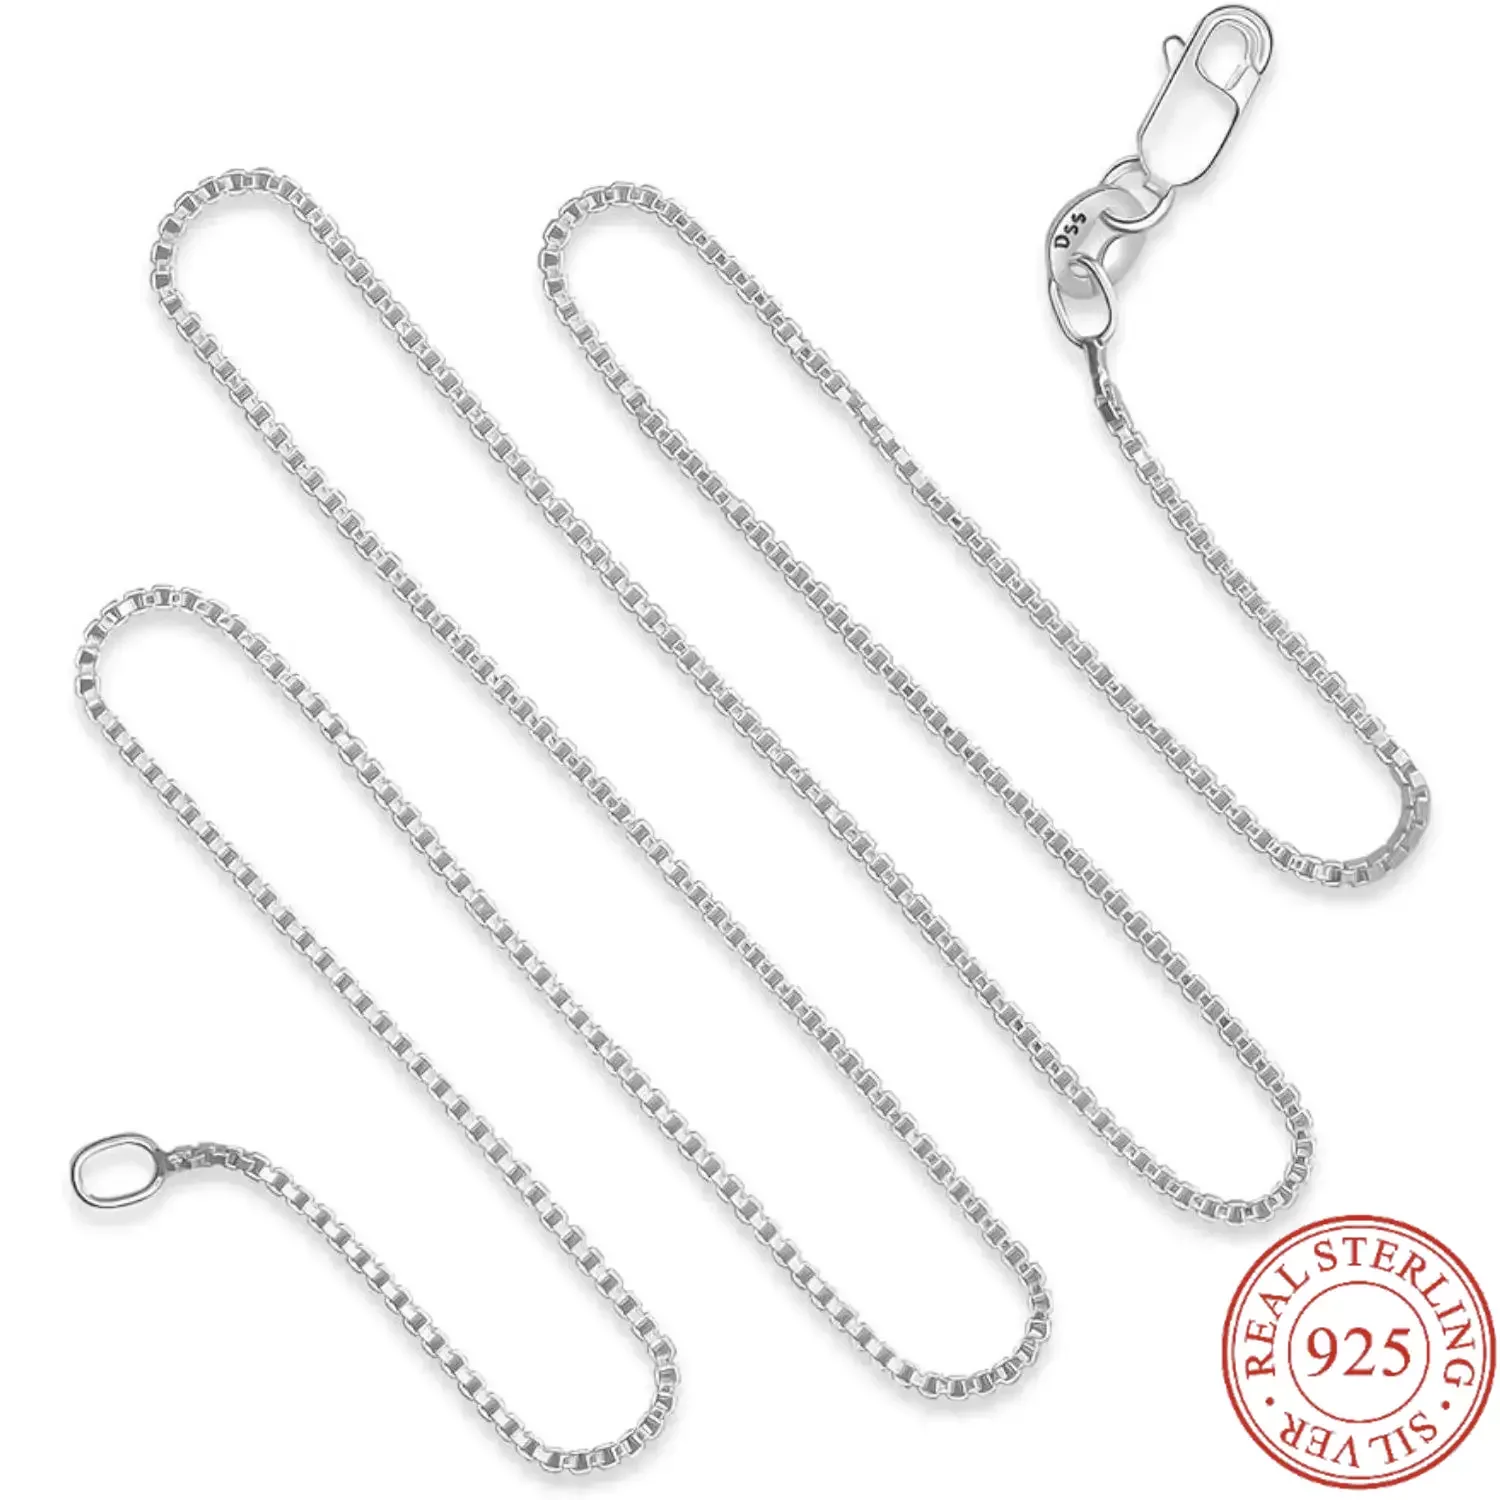 

Fansilver Italian Chain for Women - Elegant, Hypoallergenic, and Tarnish-Resistant Silver Chains